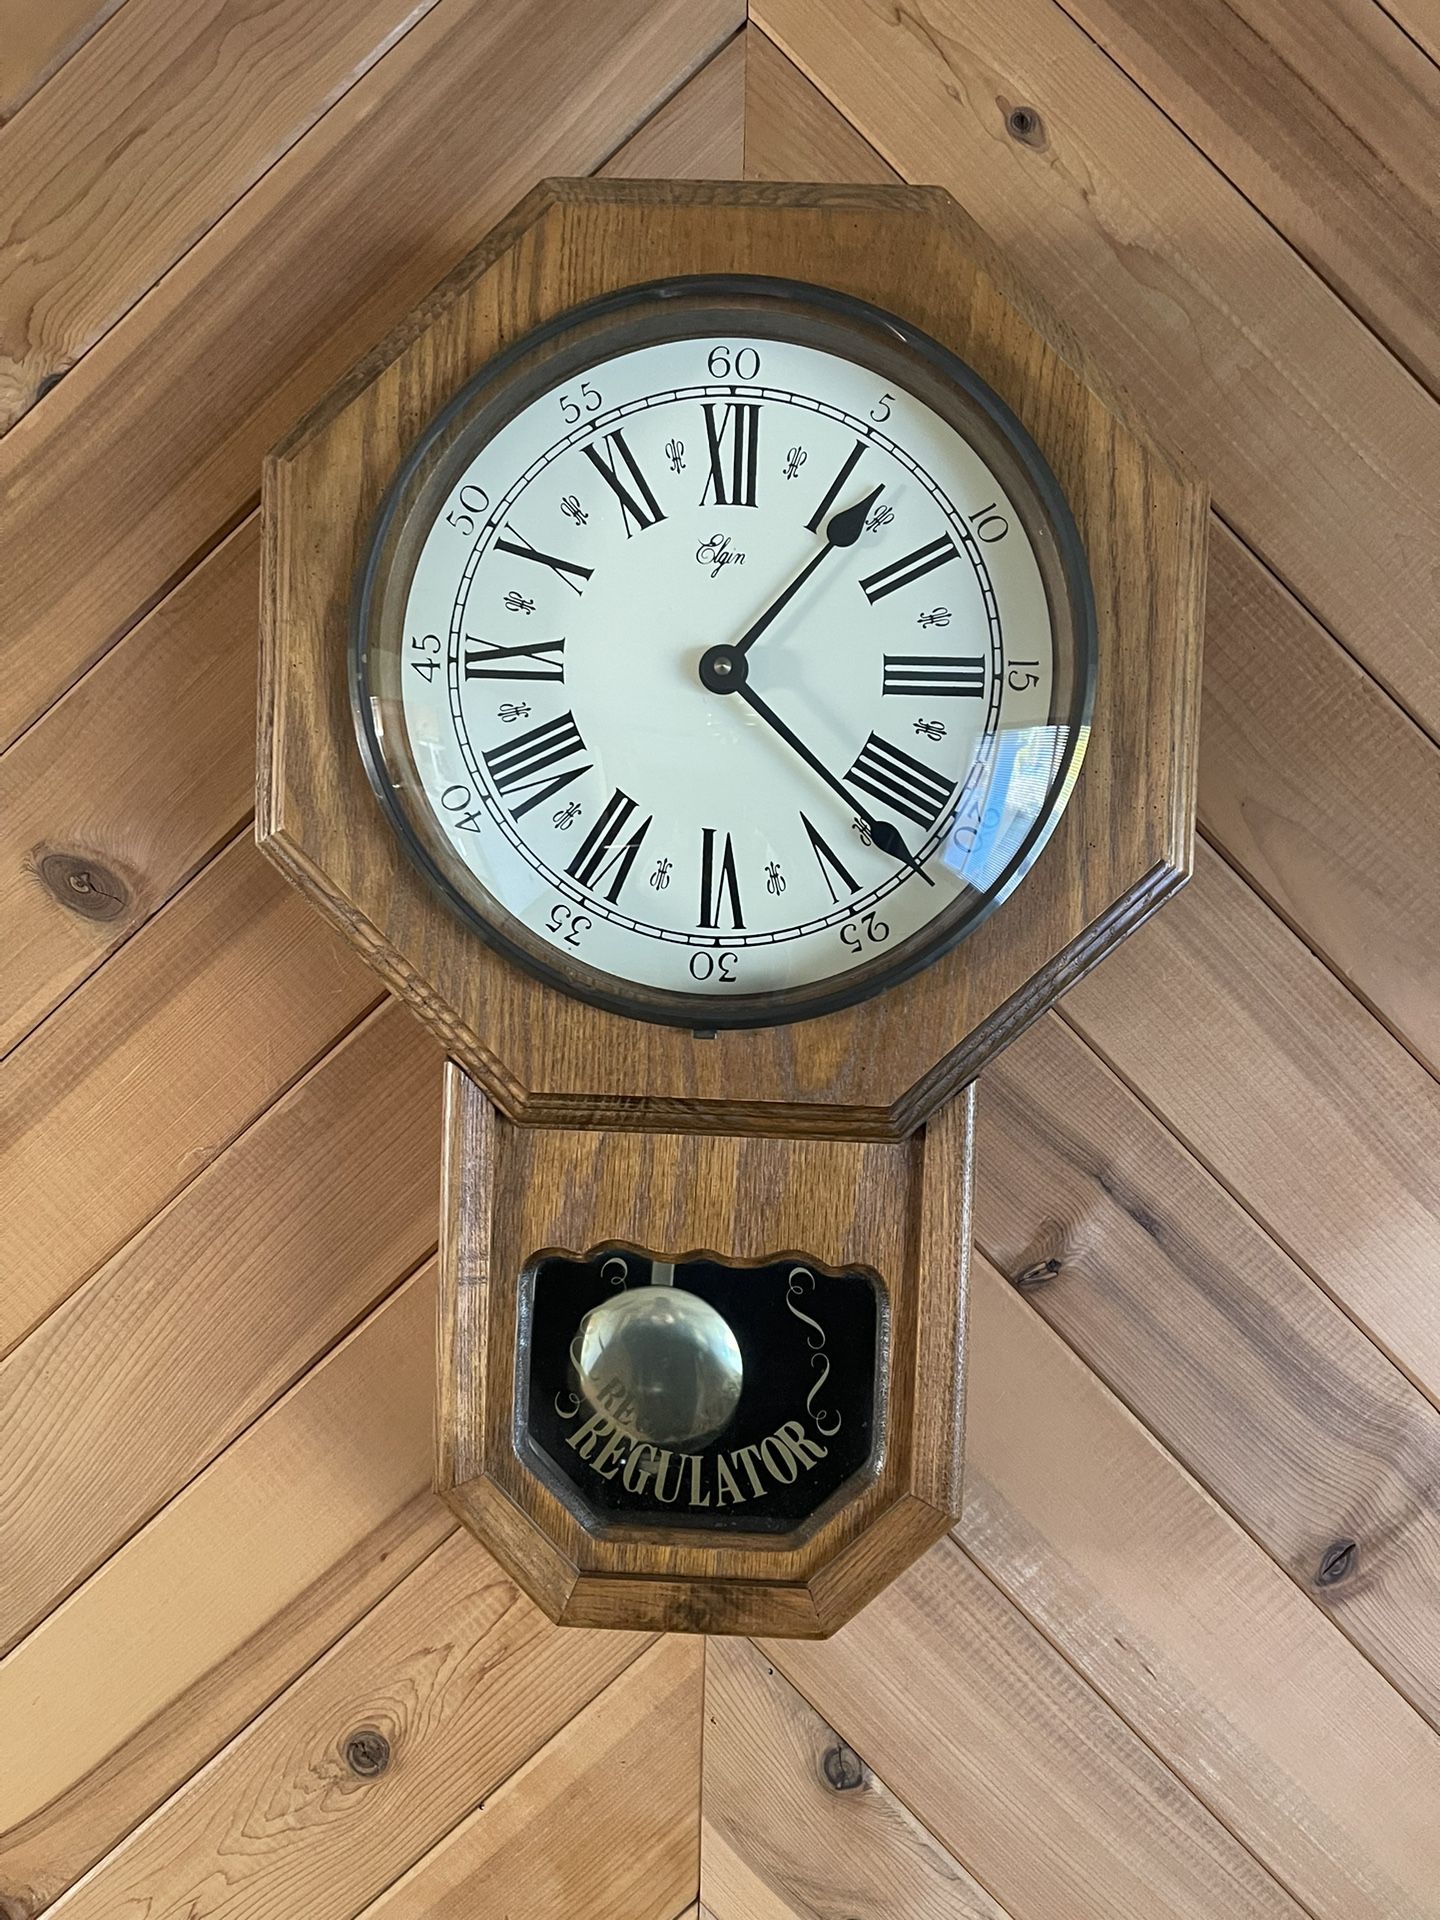 Regulator Wall Clock With Chime